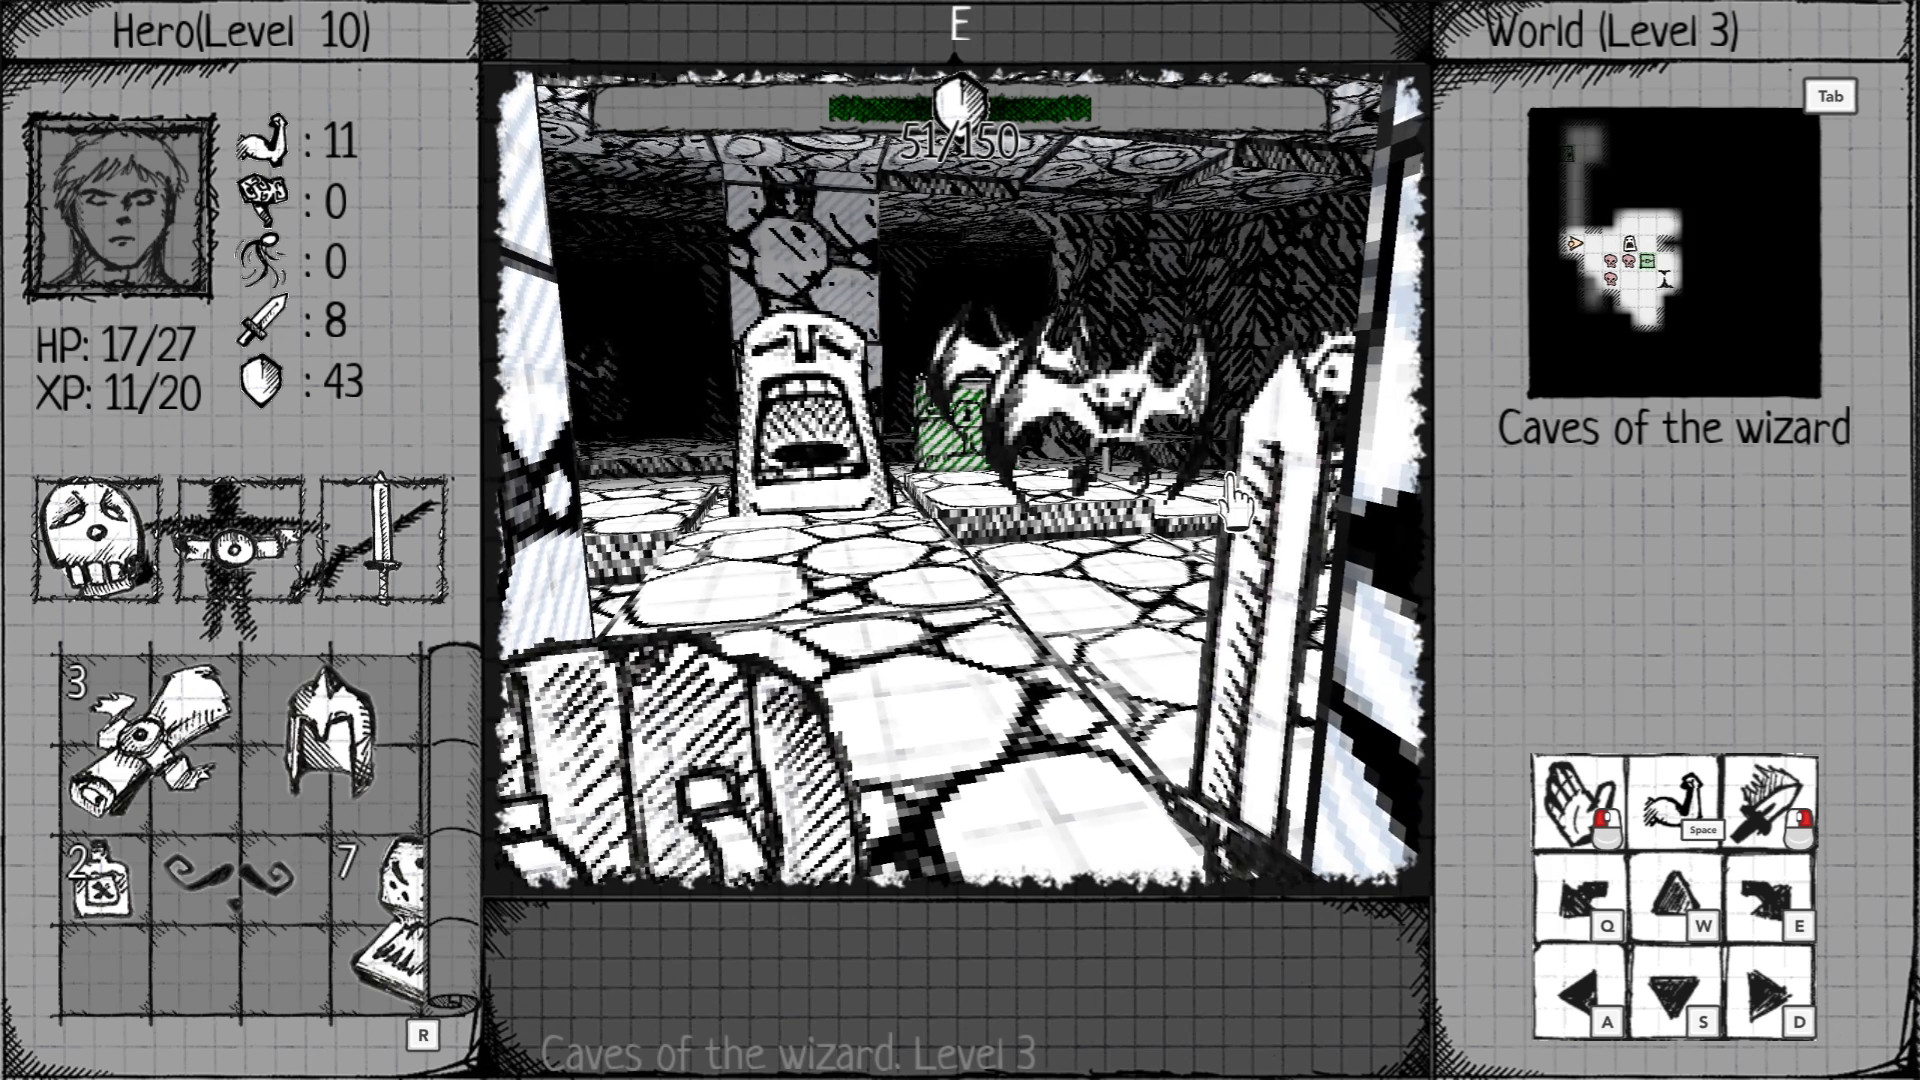 Drawngeon: Dungeons of Ink and Paper Steam CD Key 1.39 $